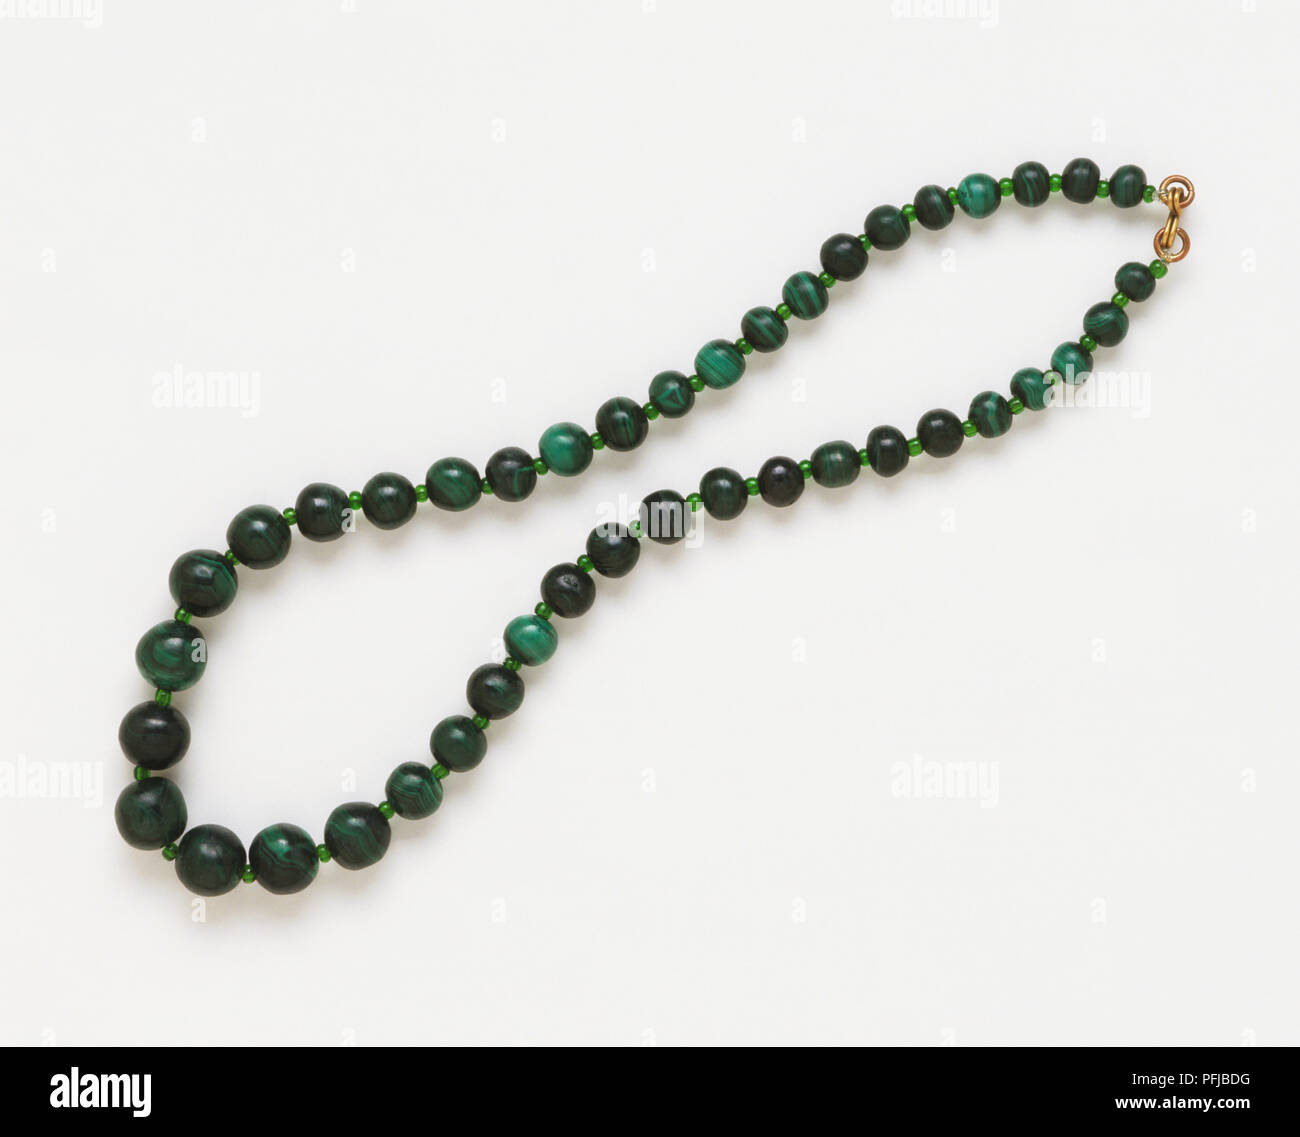 Green bead necklace Stock Photo